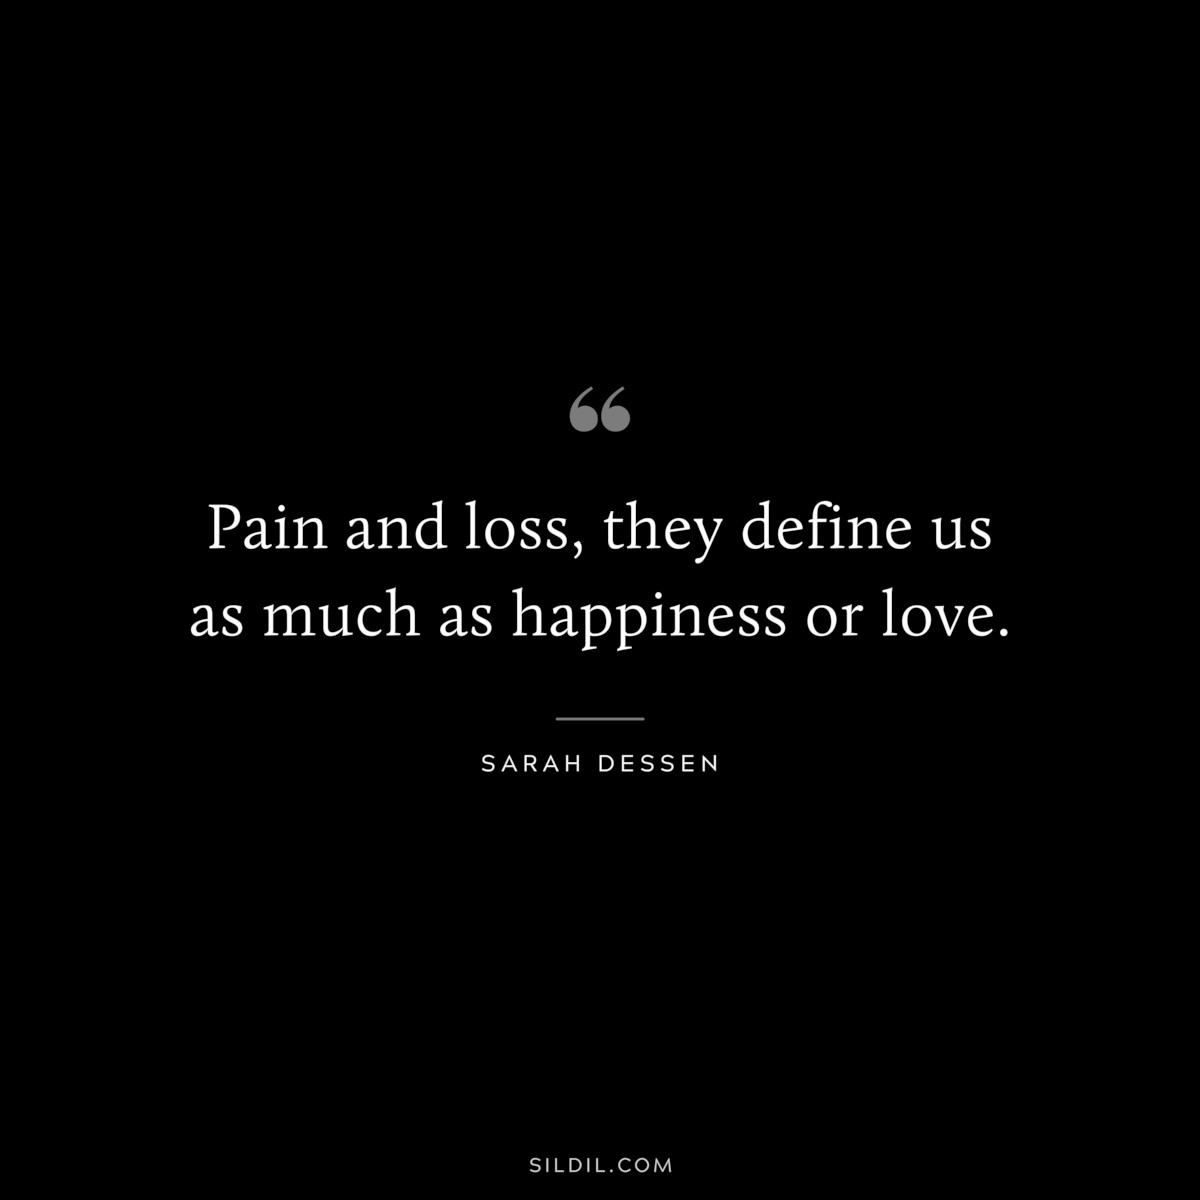 Pain and loss, they define us as much as happiness or love. ― Sarah Dessen